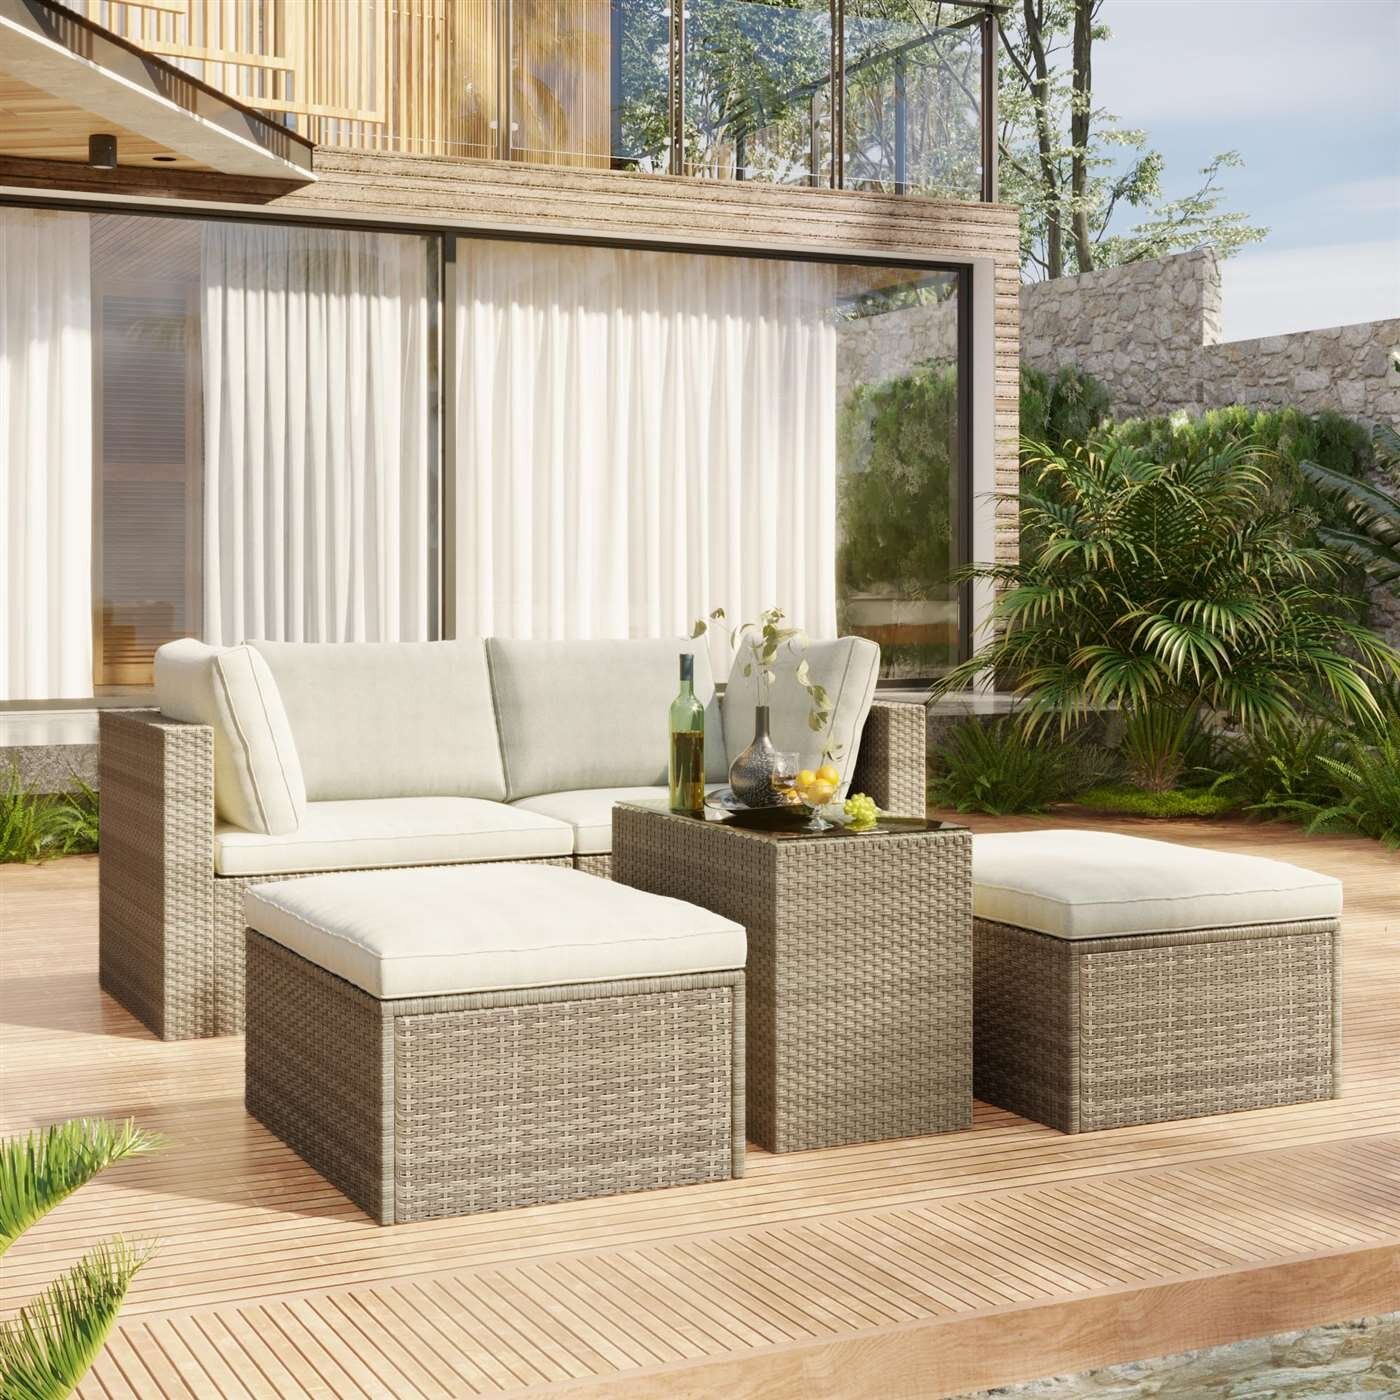 Latitude Run® Outdoor Patio Furniture Set, 5 Piece Wicker Rattan Sectional  Sofa Set, Brown And Beige | Wayfair Inside Outdoor Rattan Sectional Sofas With Coffee Table (Photo 6 of 15)